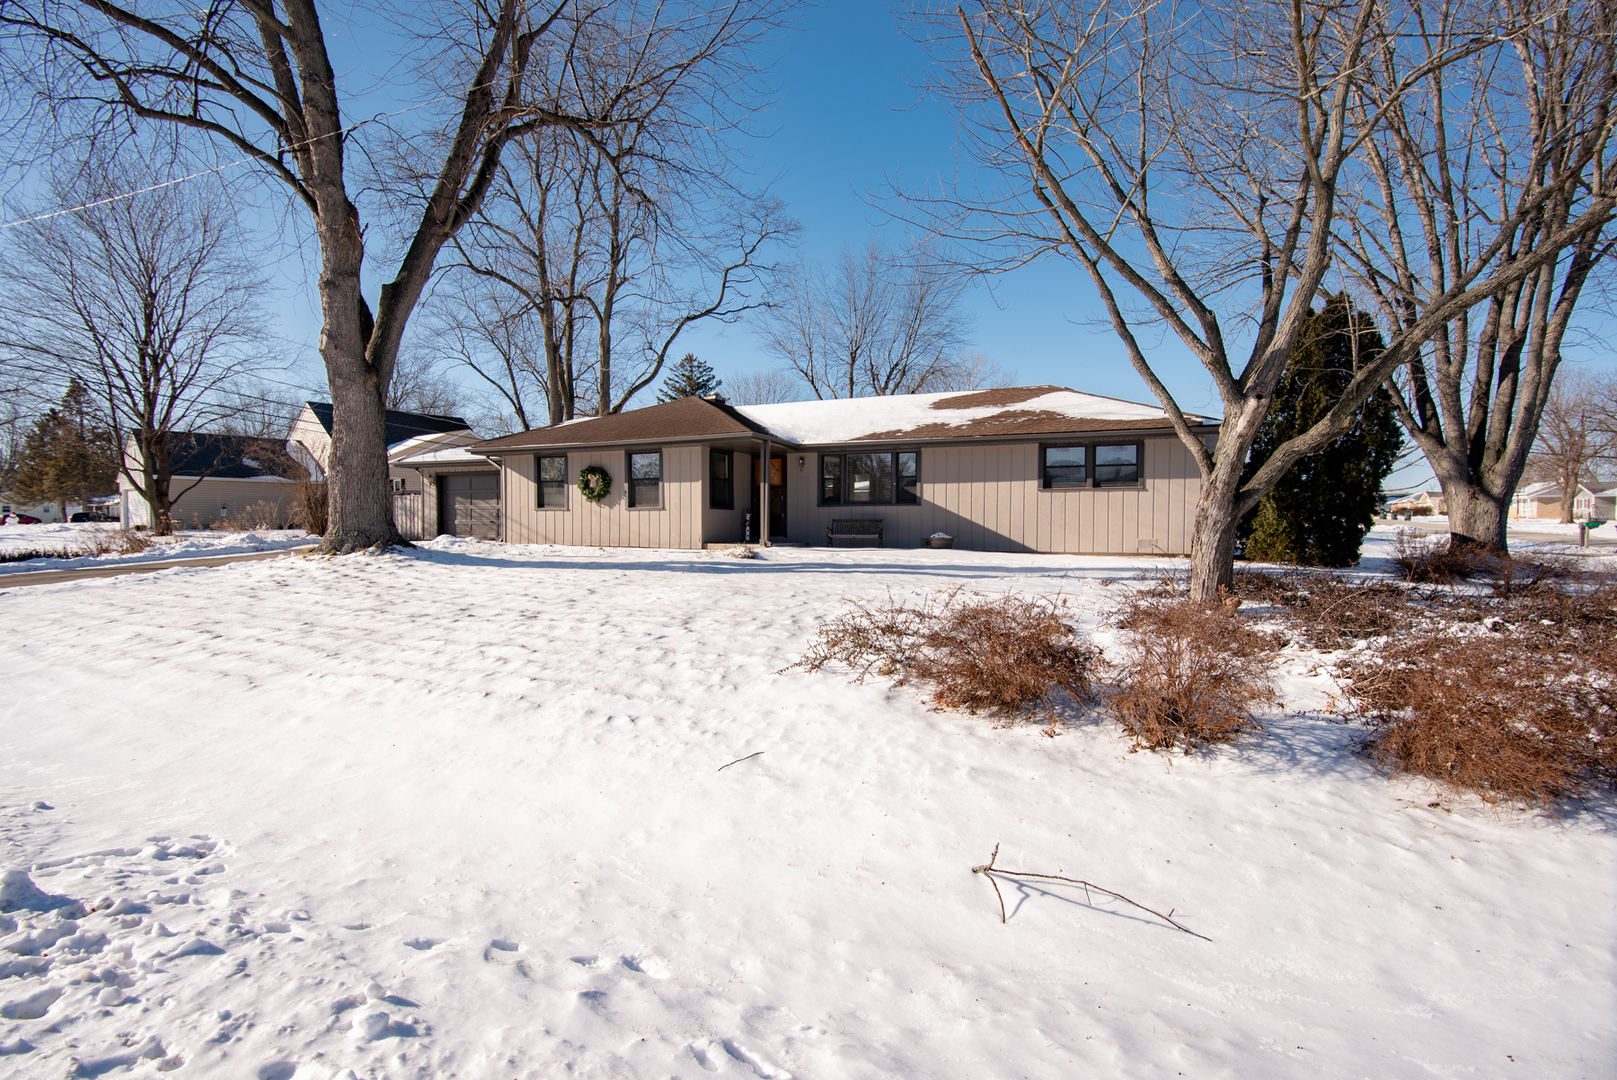 a front view of house with yard covered in snow